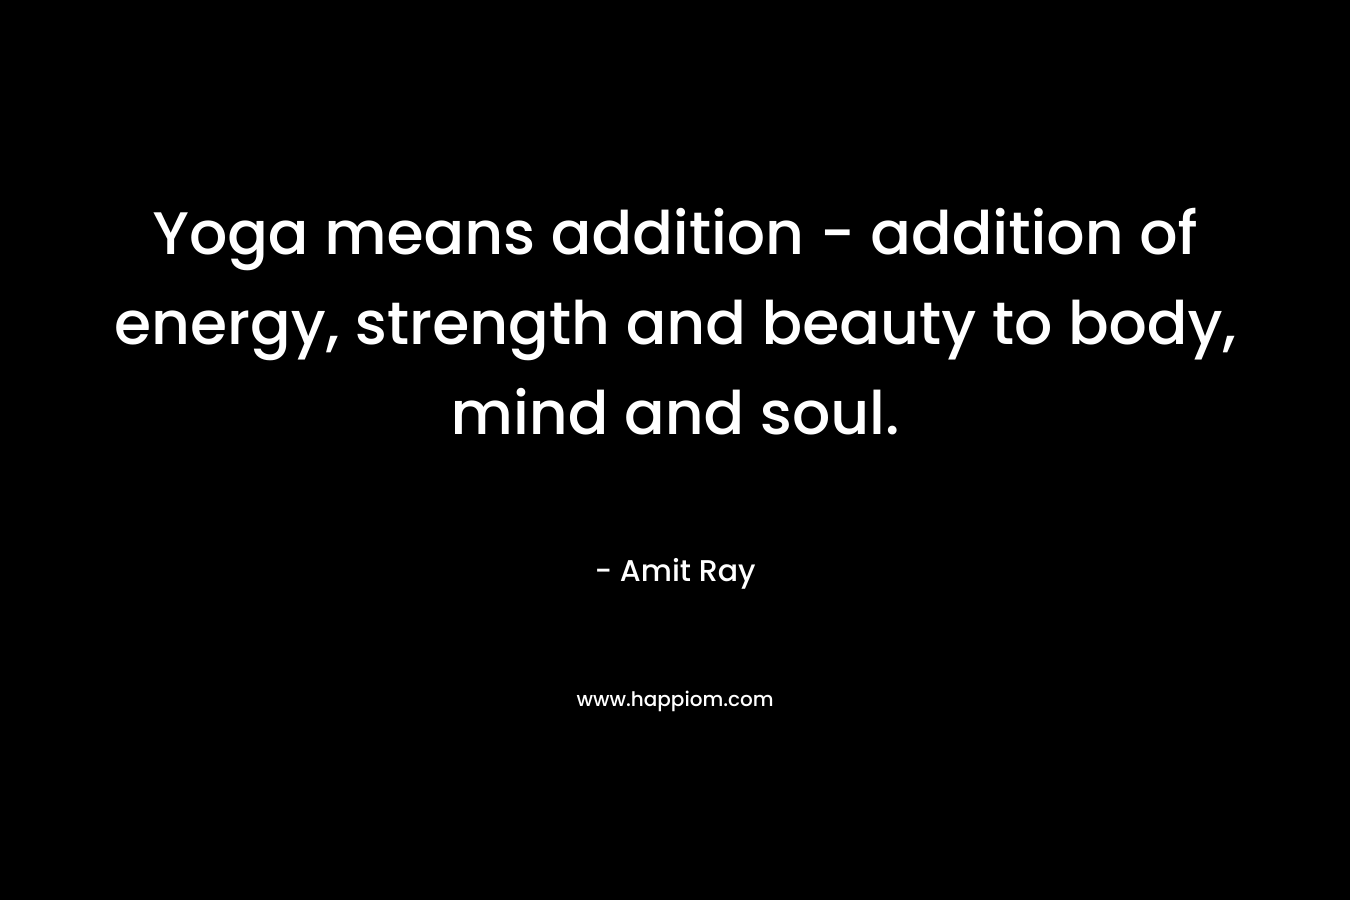 Yoga means addition - addition of energy, strength and beauty to body, mind and soul.